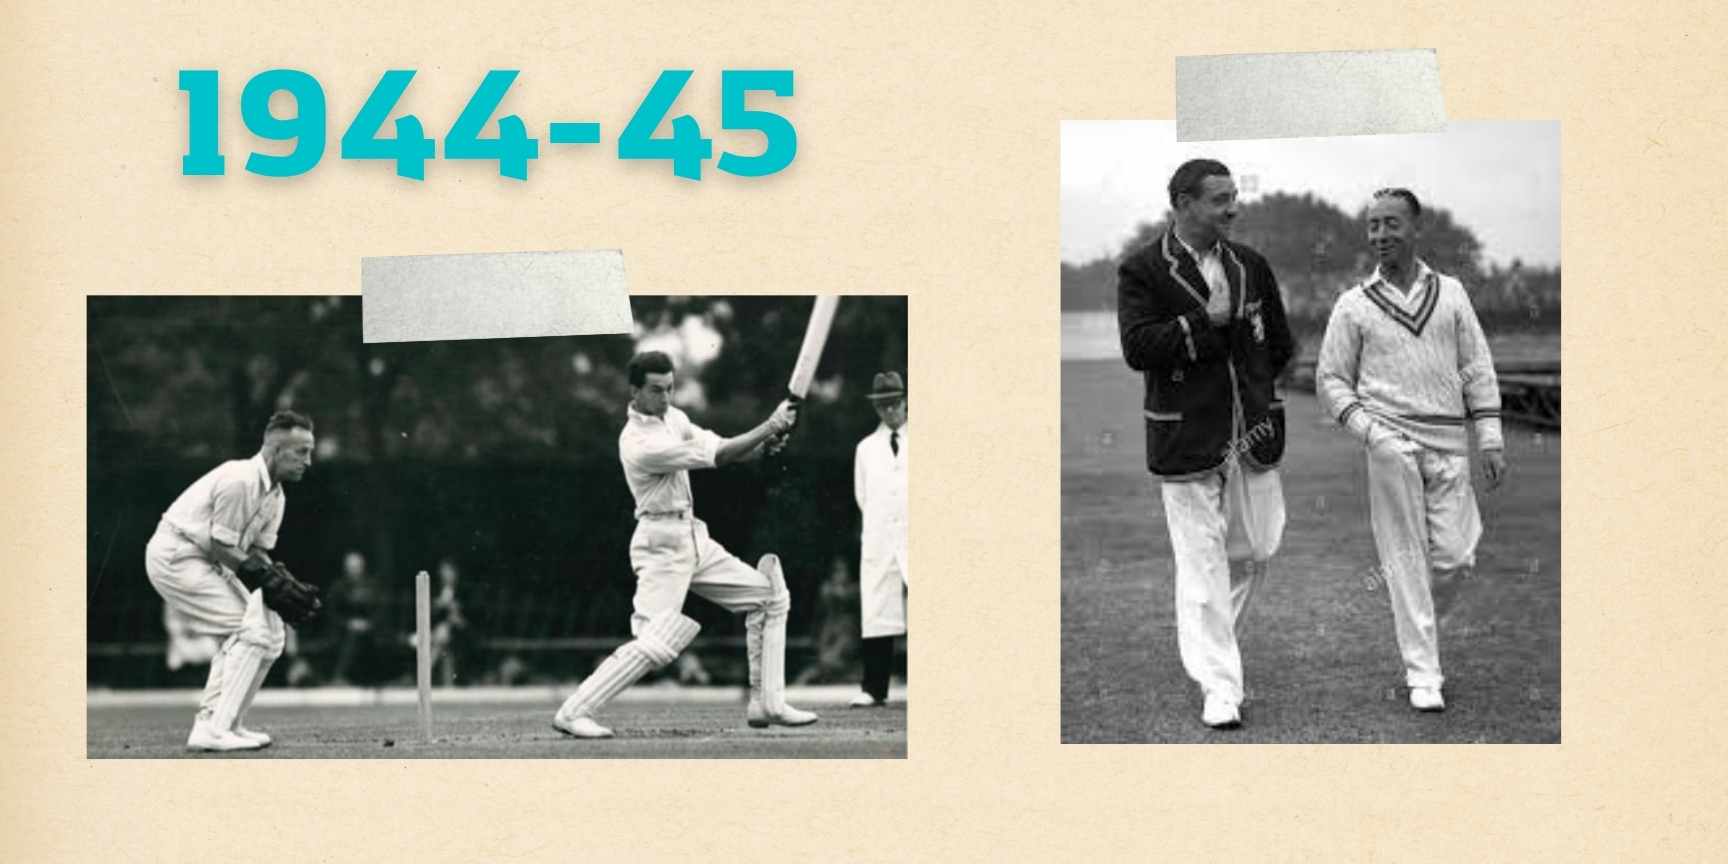 1944-45 and cricket players